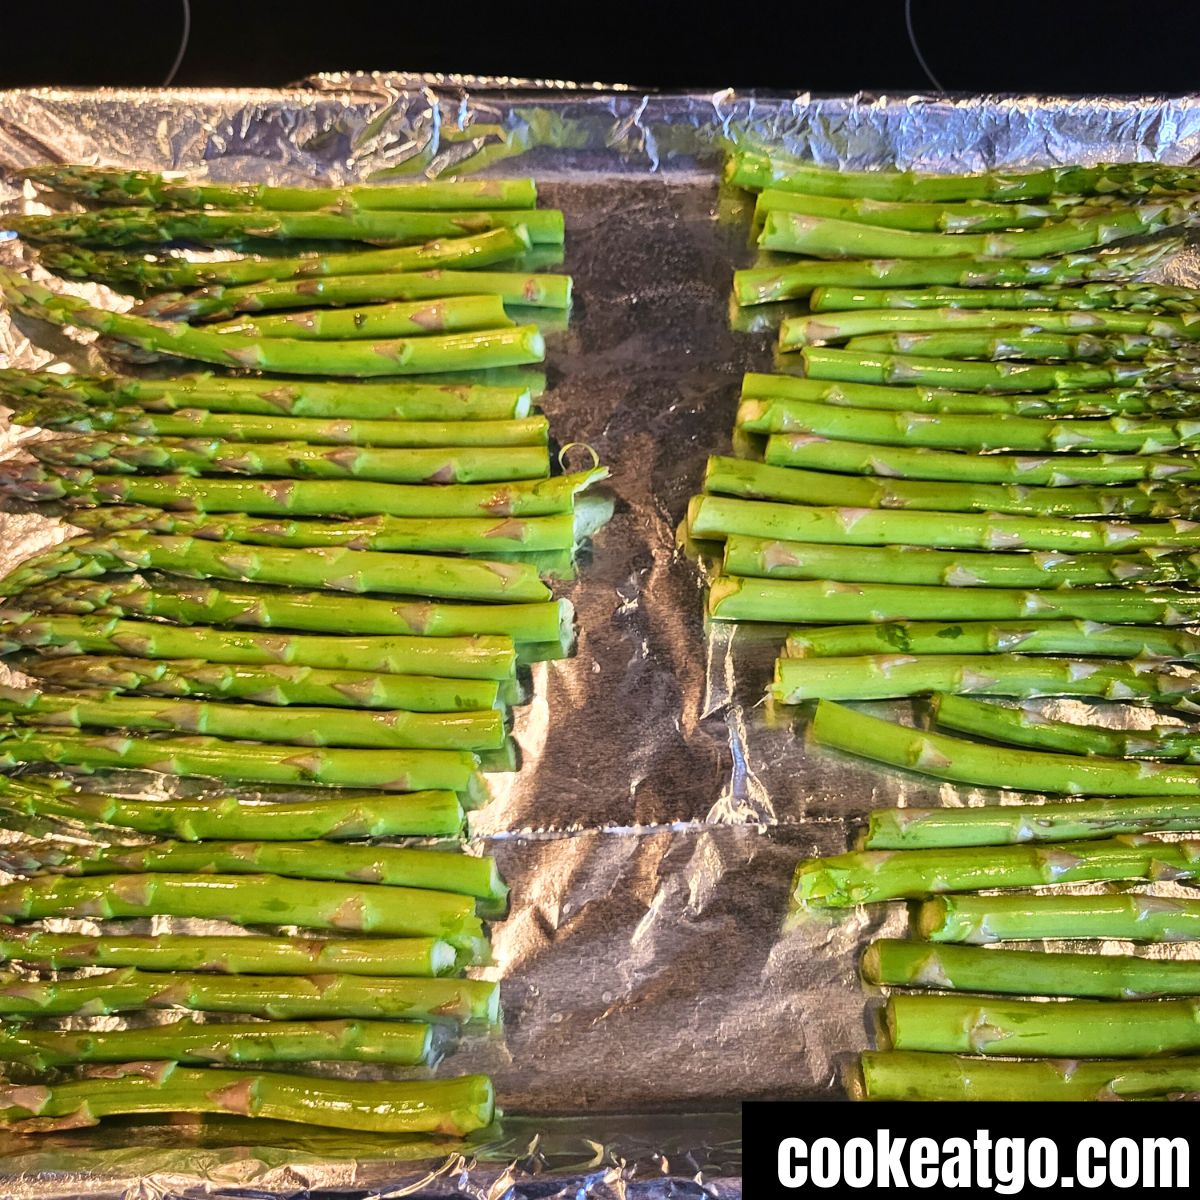 Cleaned Asparagus on cookie sheet lined with foil